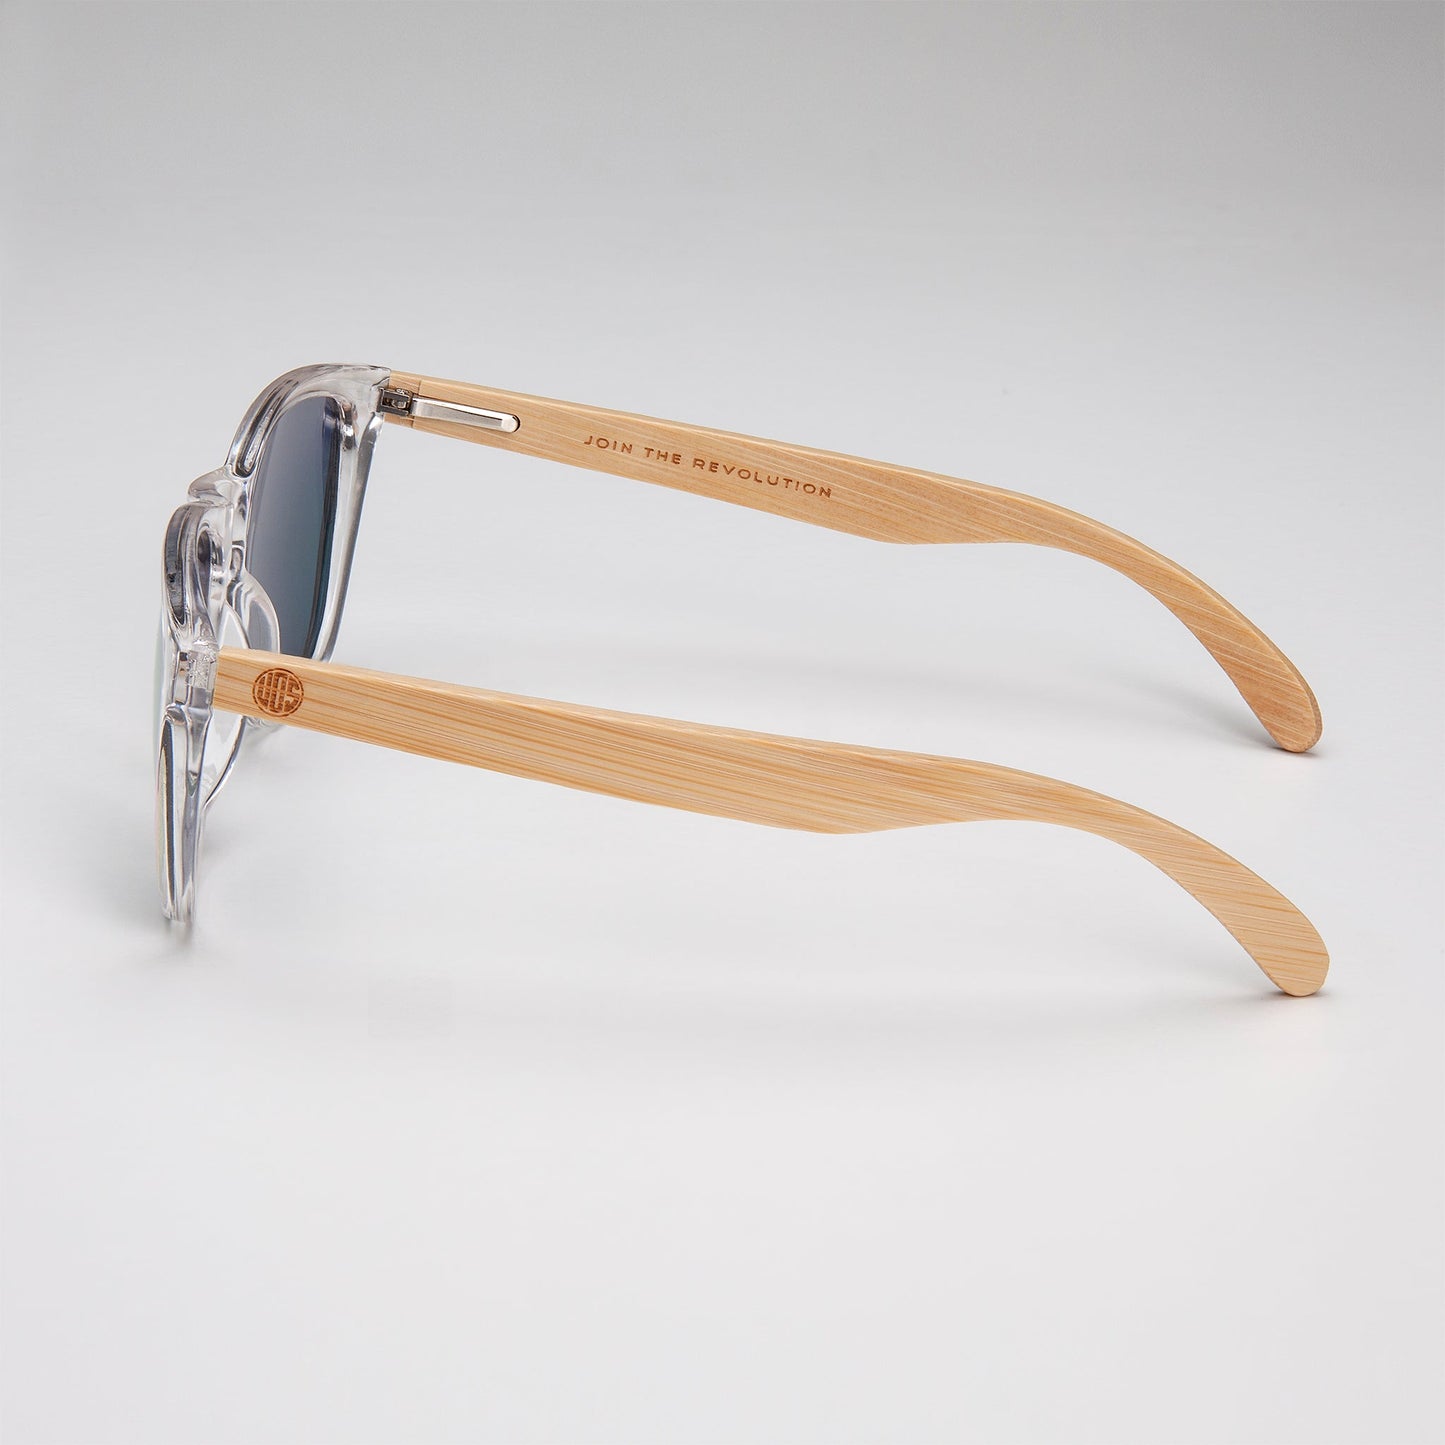 Eco Friendly Sunglasseseco friendly sunglassesBring out your wild side with Kuta Beach Mirrored glasses! These wooden frames are made with less plastic for a lighter, greener feel. Perfect for any adventure, theeco friendly sunglasses